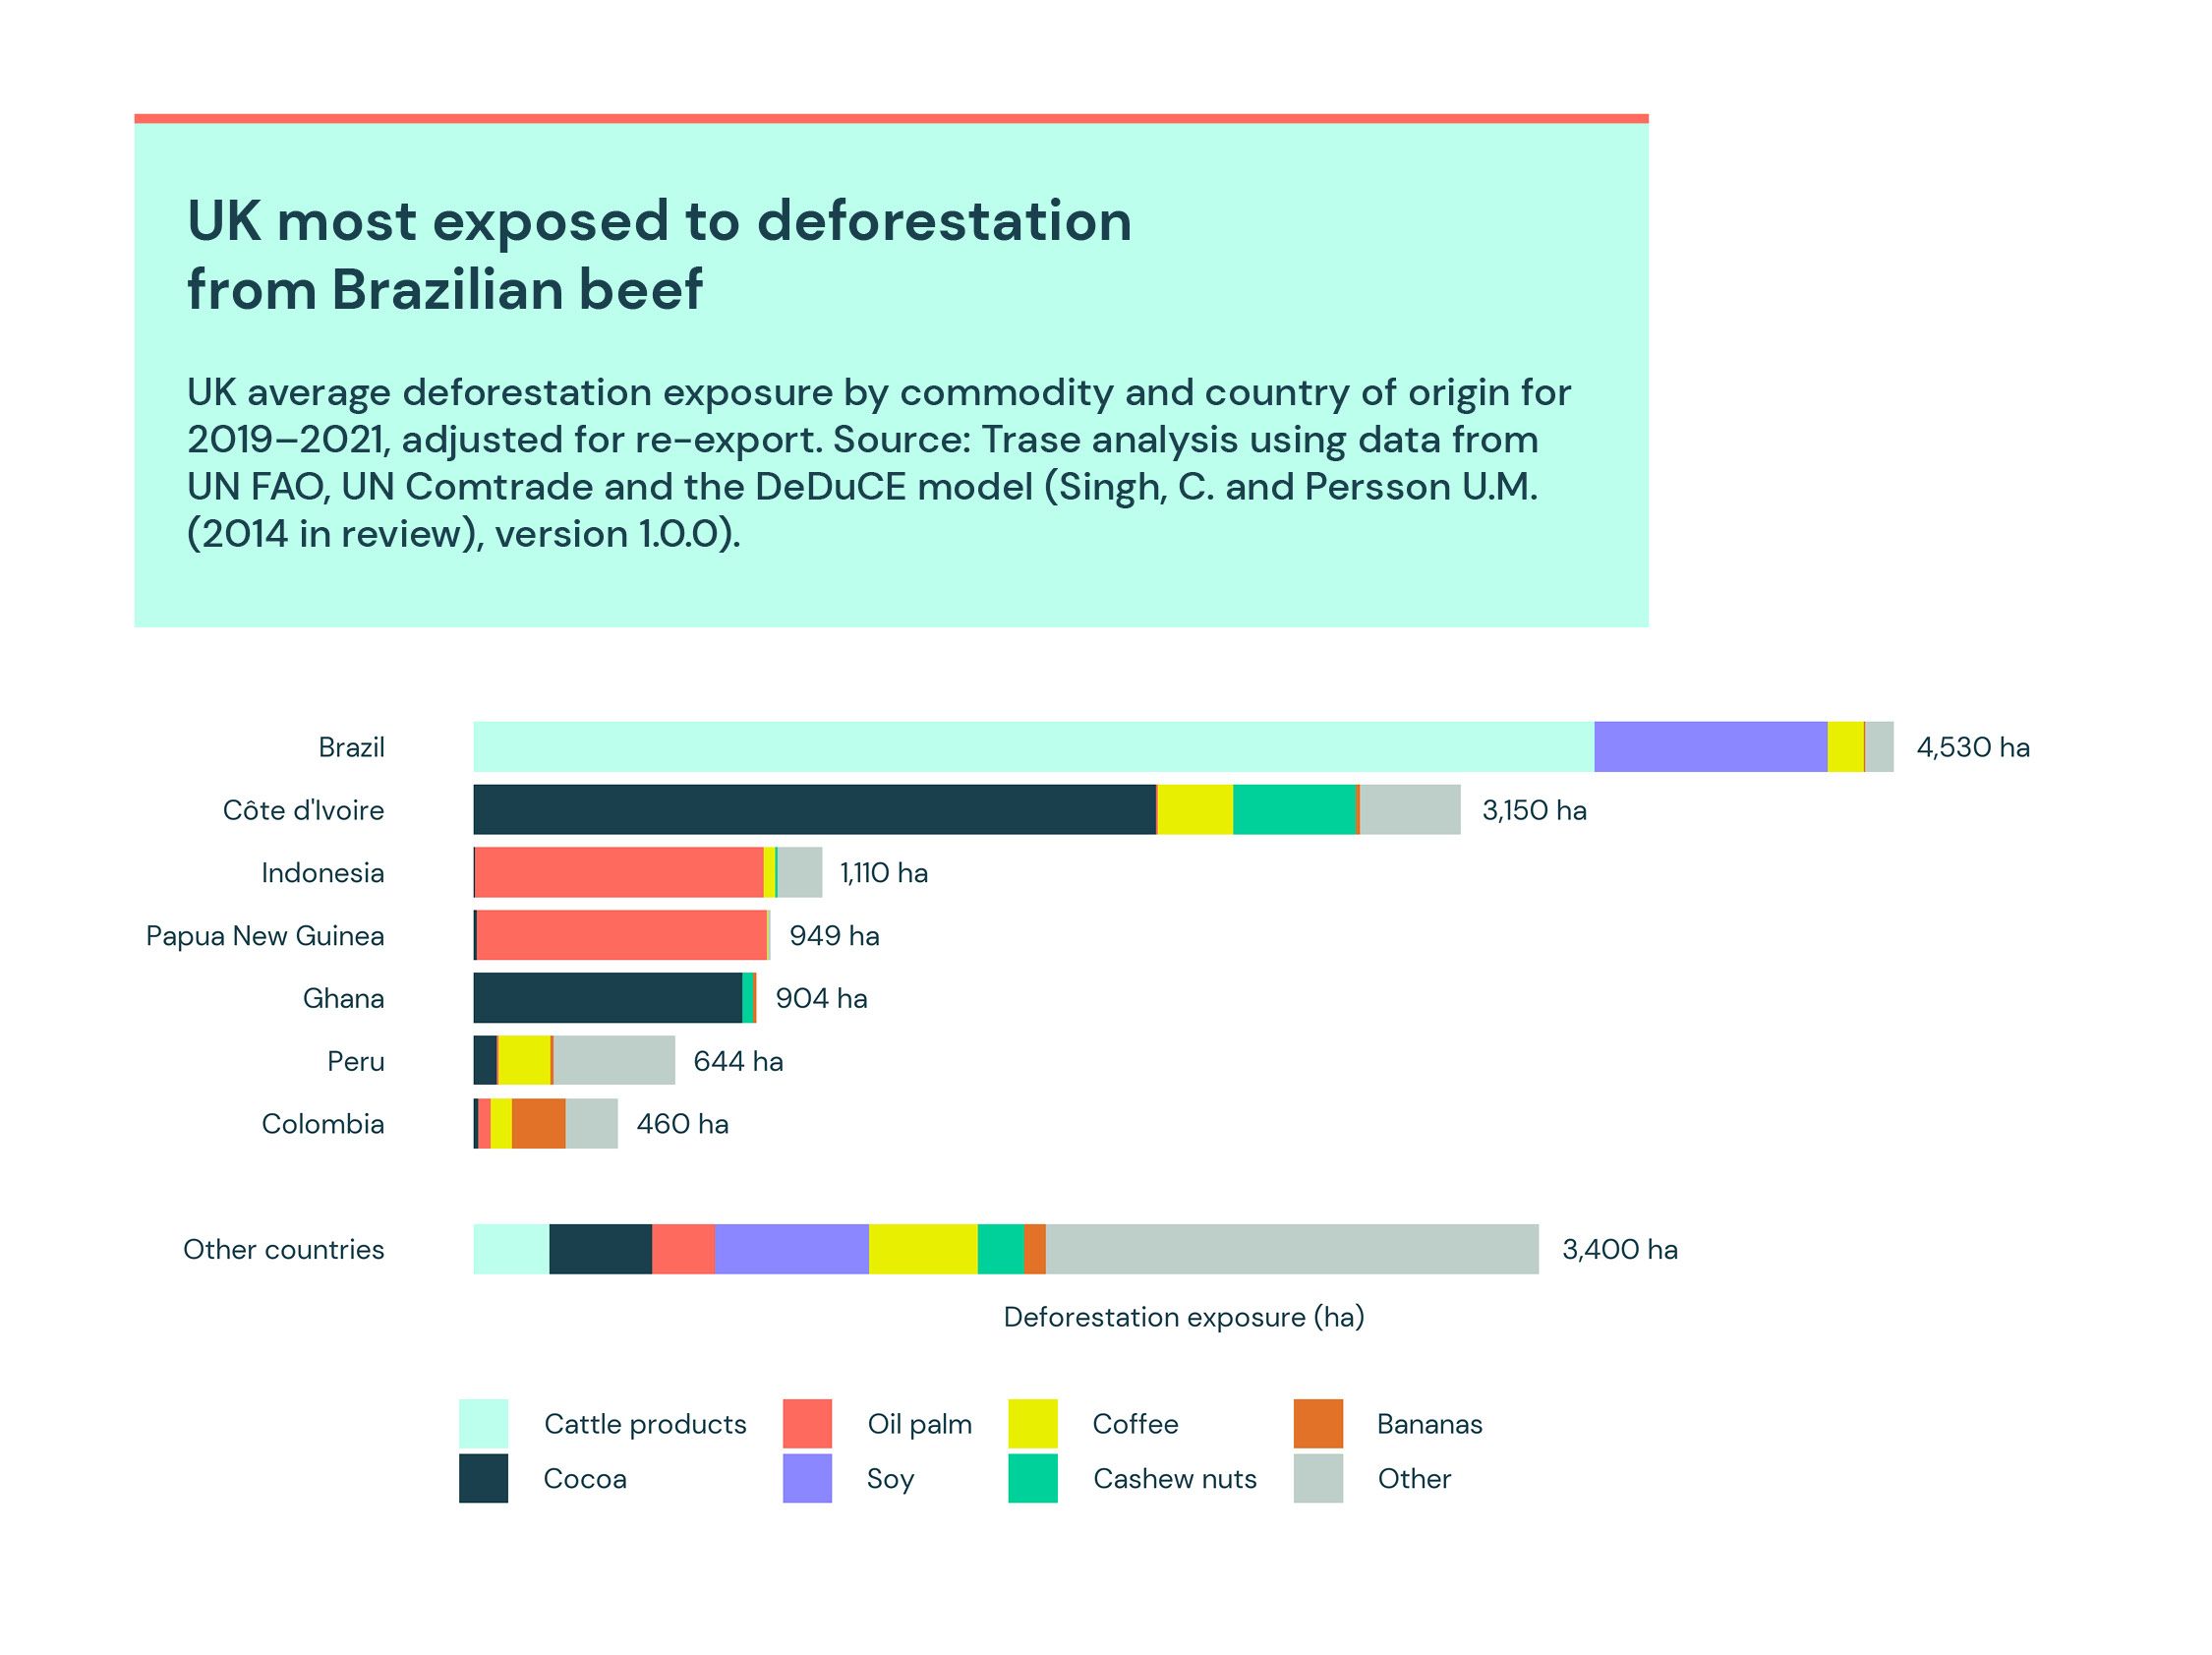 UK most exposed to deforestation from Brazilian beef 